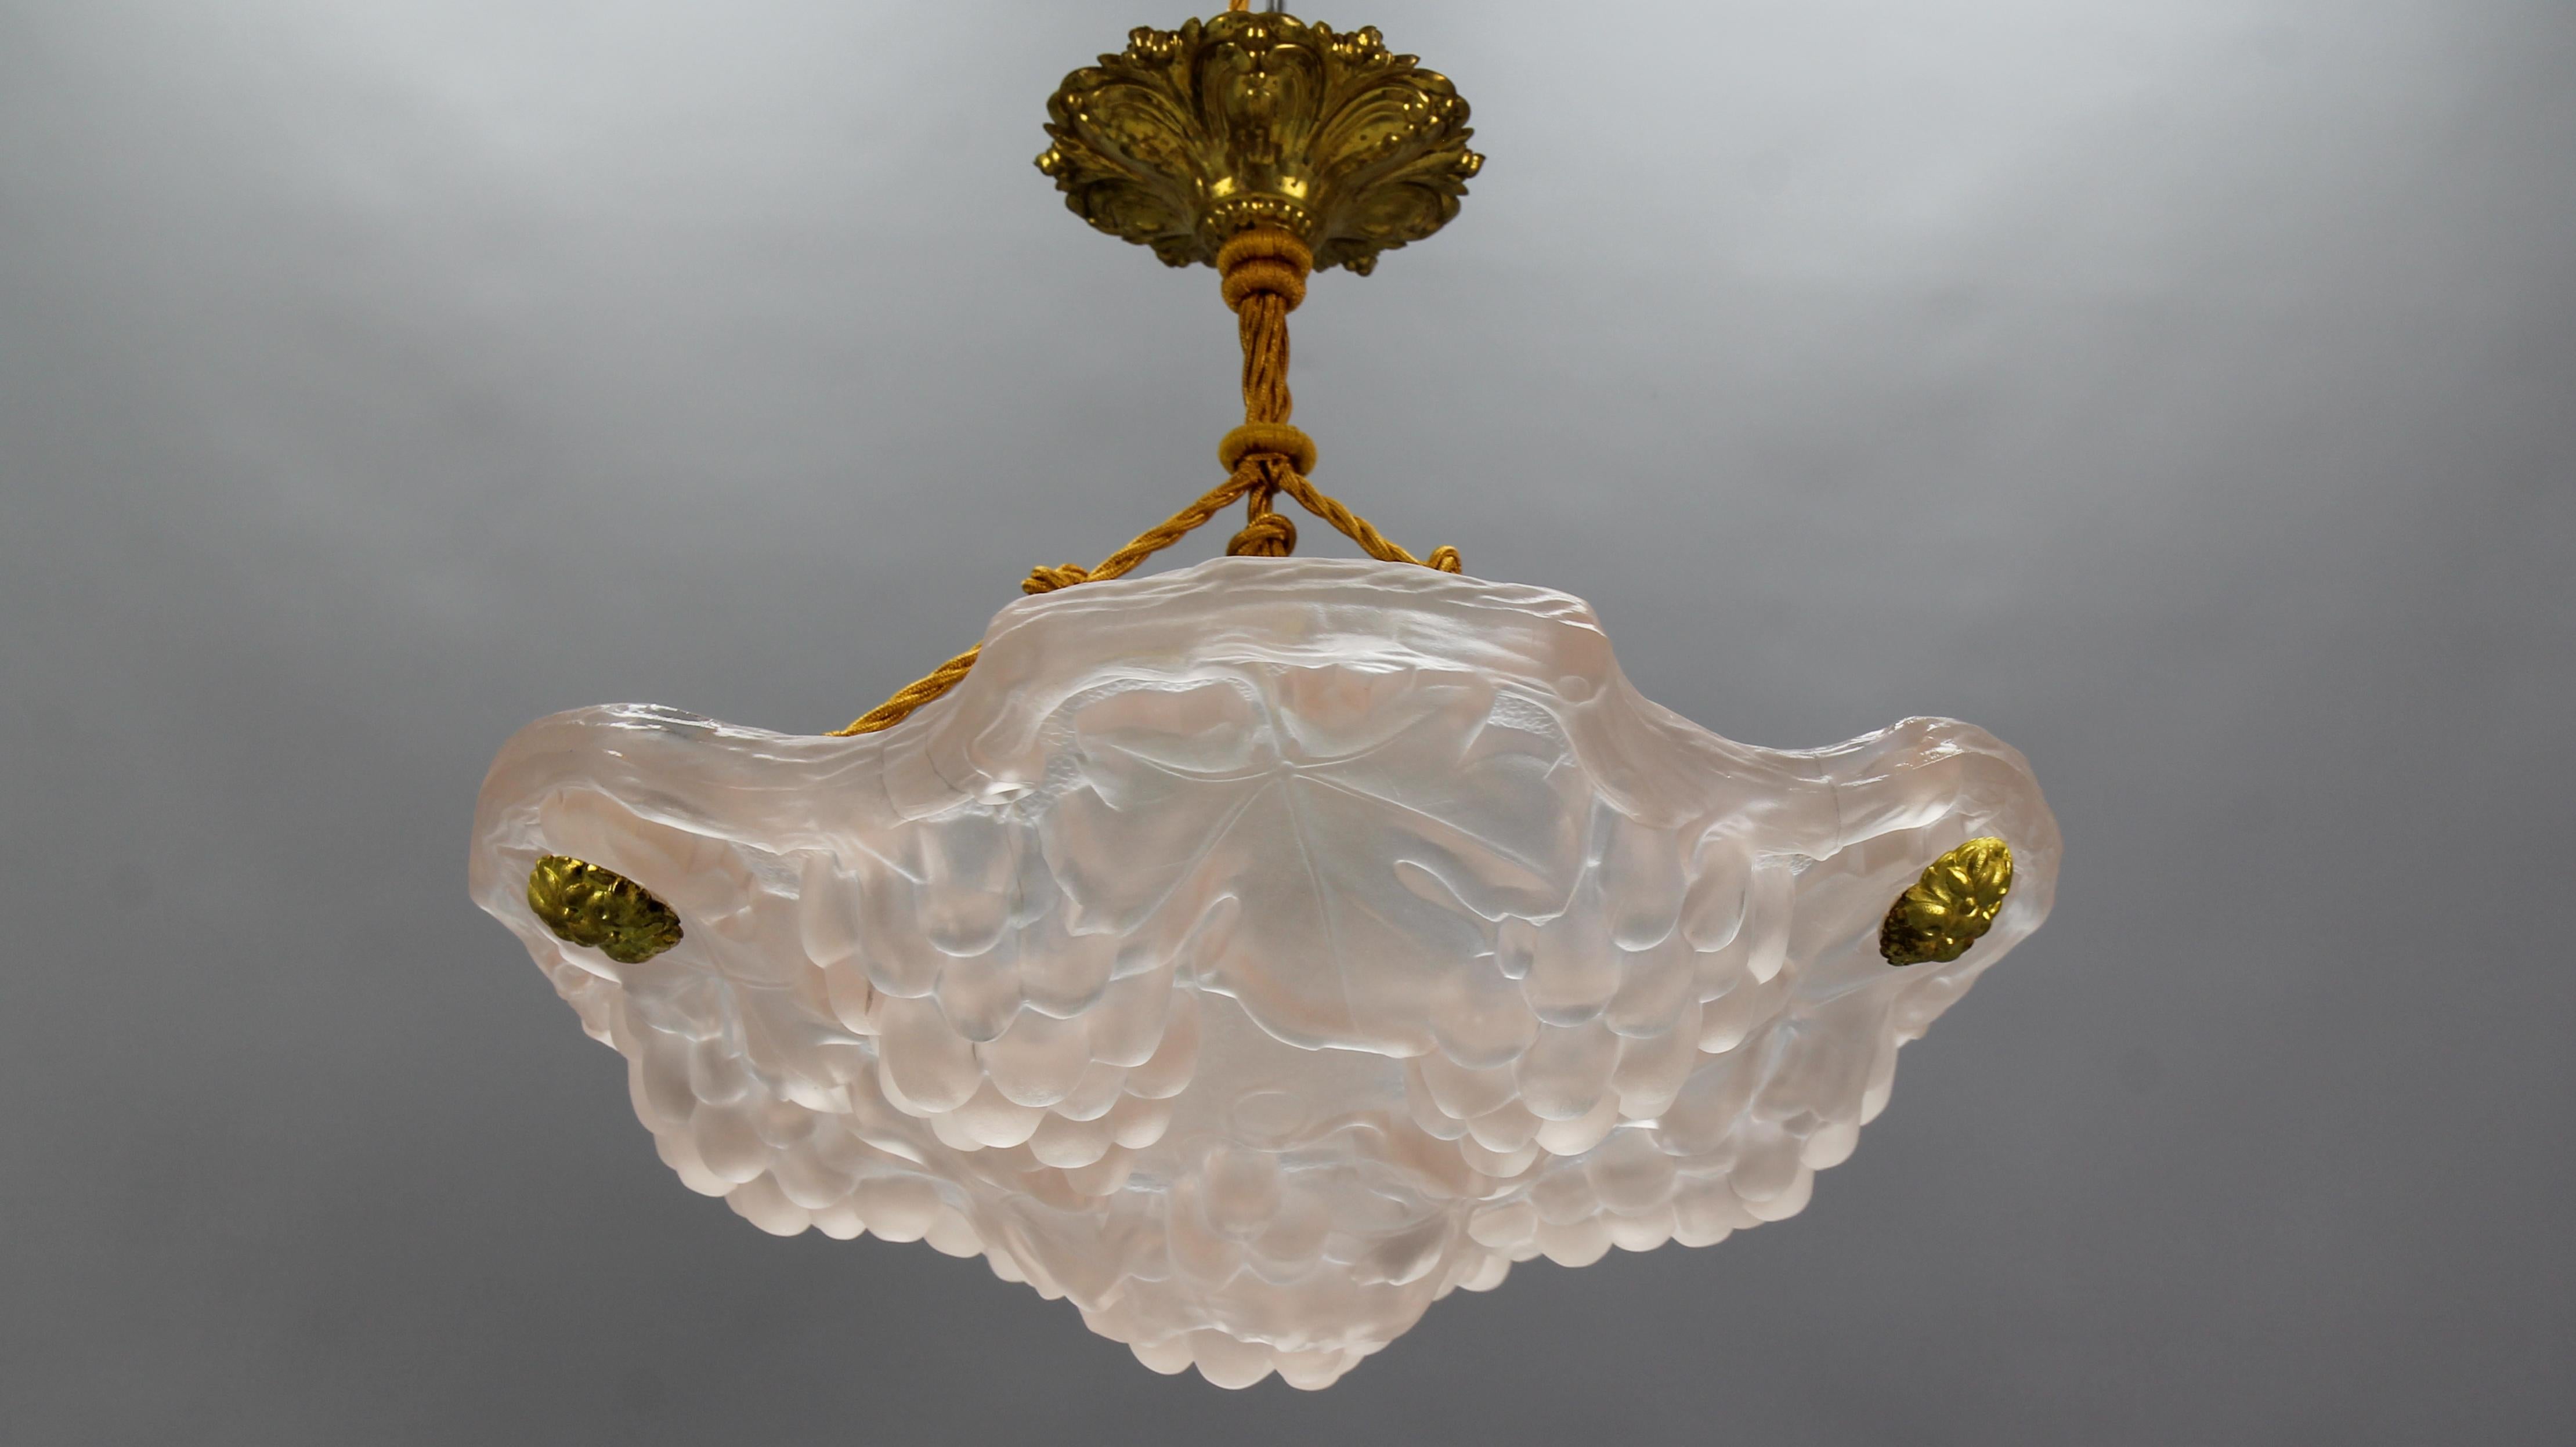 French Light Pink Frosted Glass Pendant Light with Grapes Vines by Verdun, 1930s For Sale 2